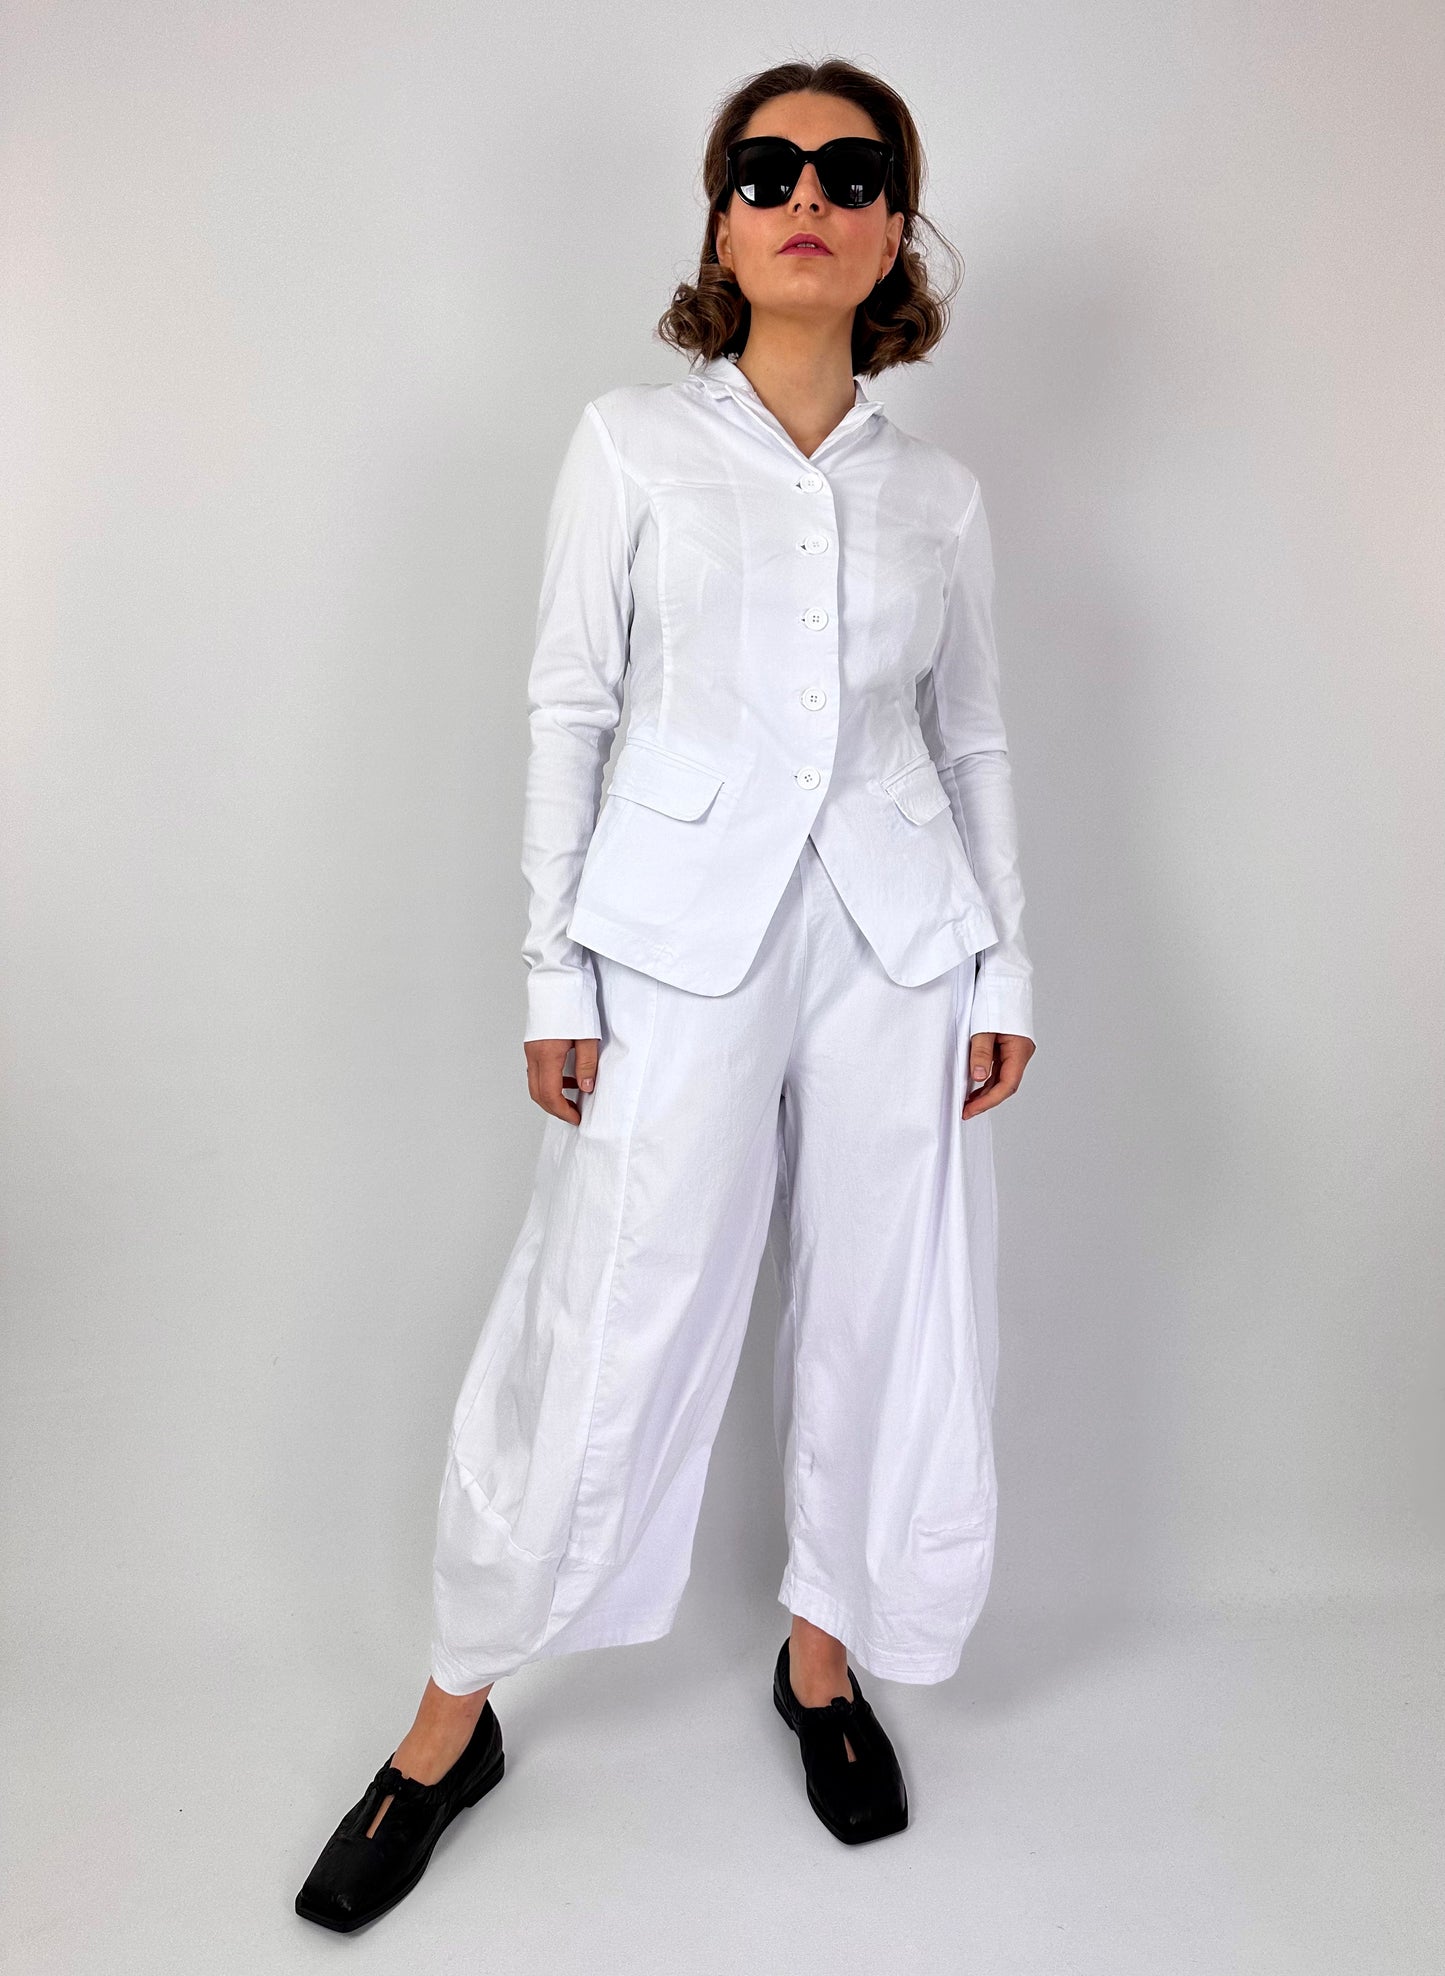 RBL 0130 Trousers White